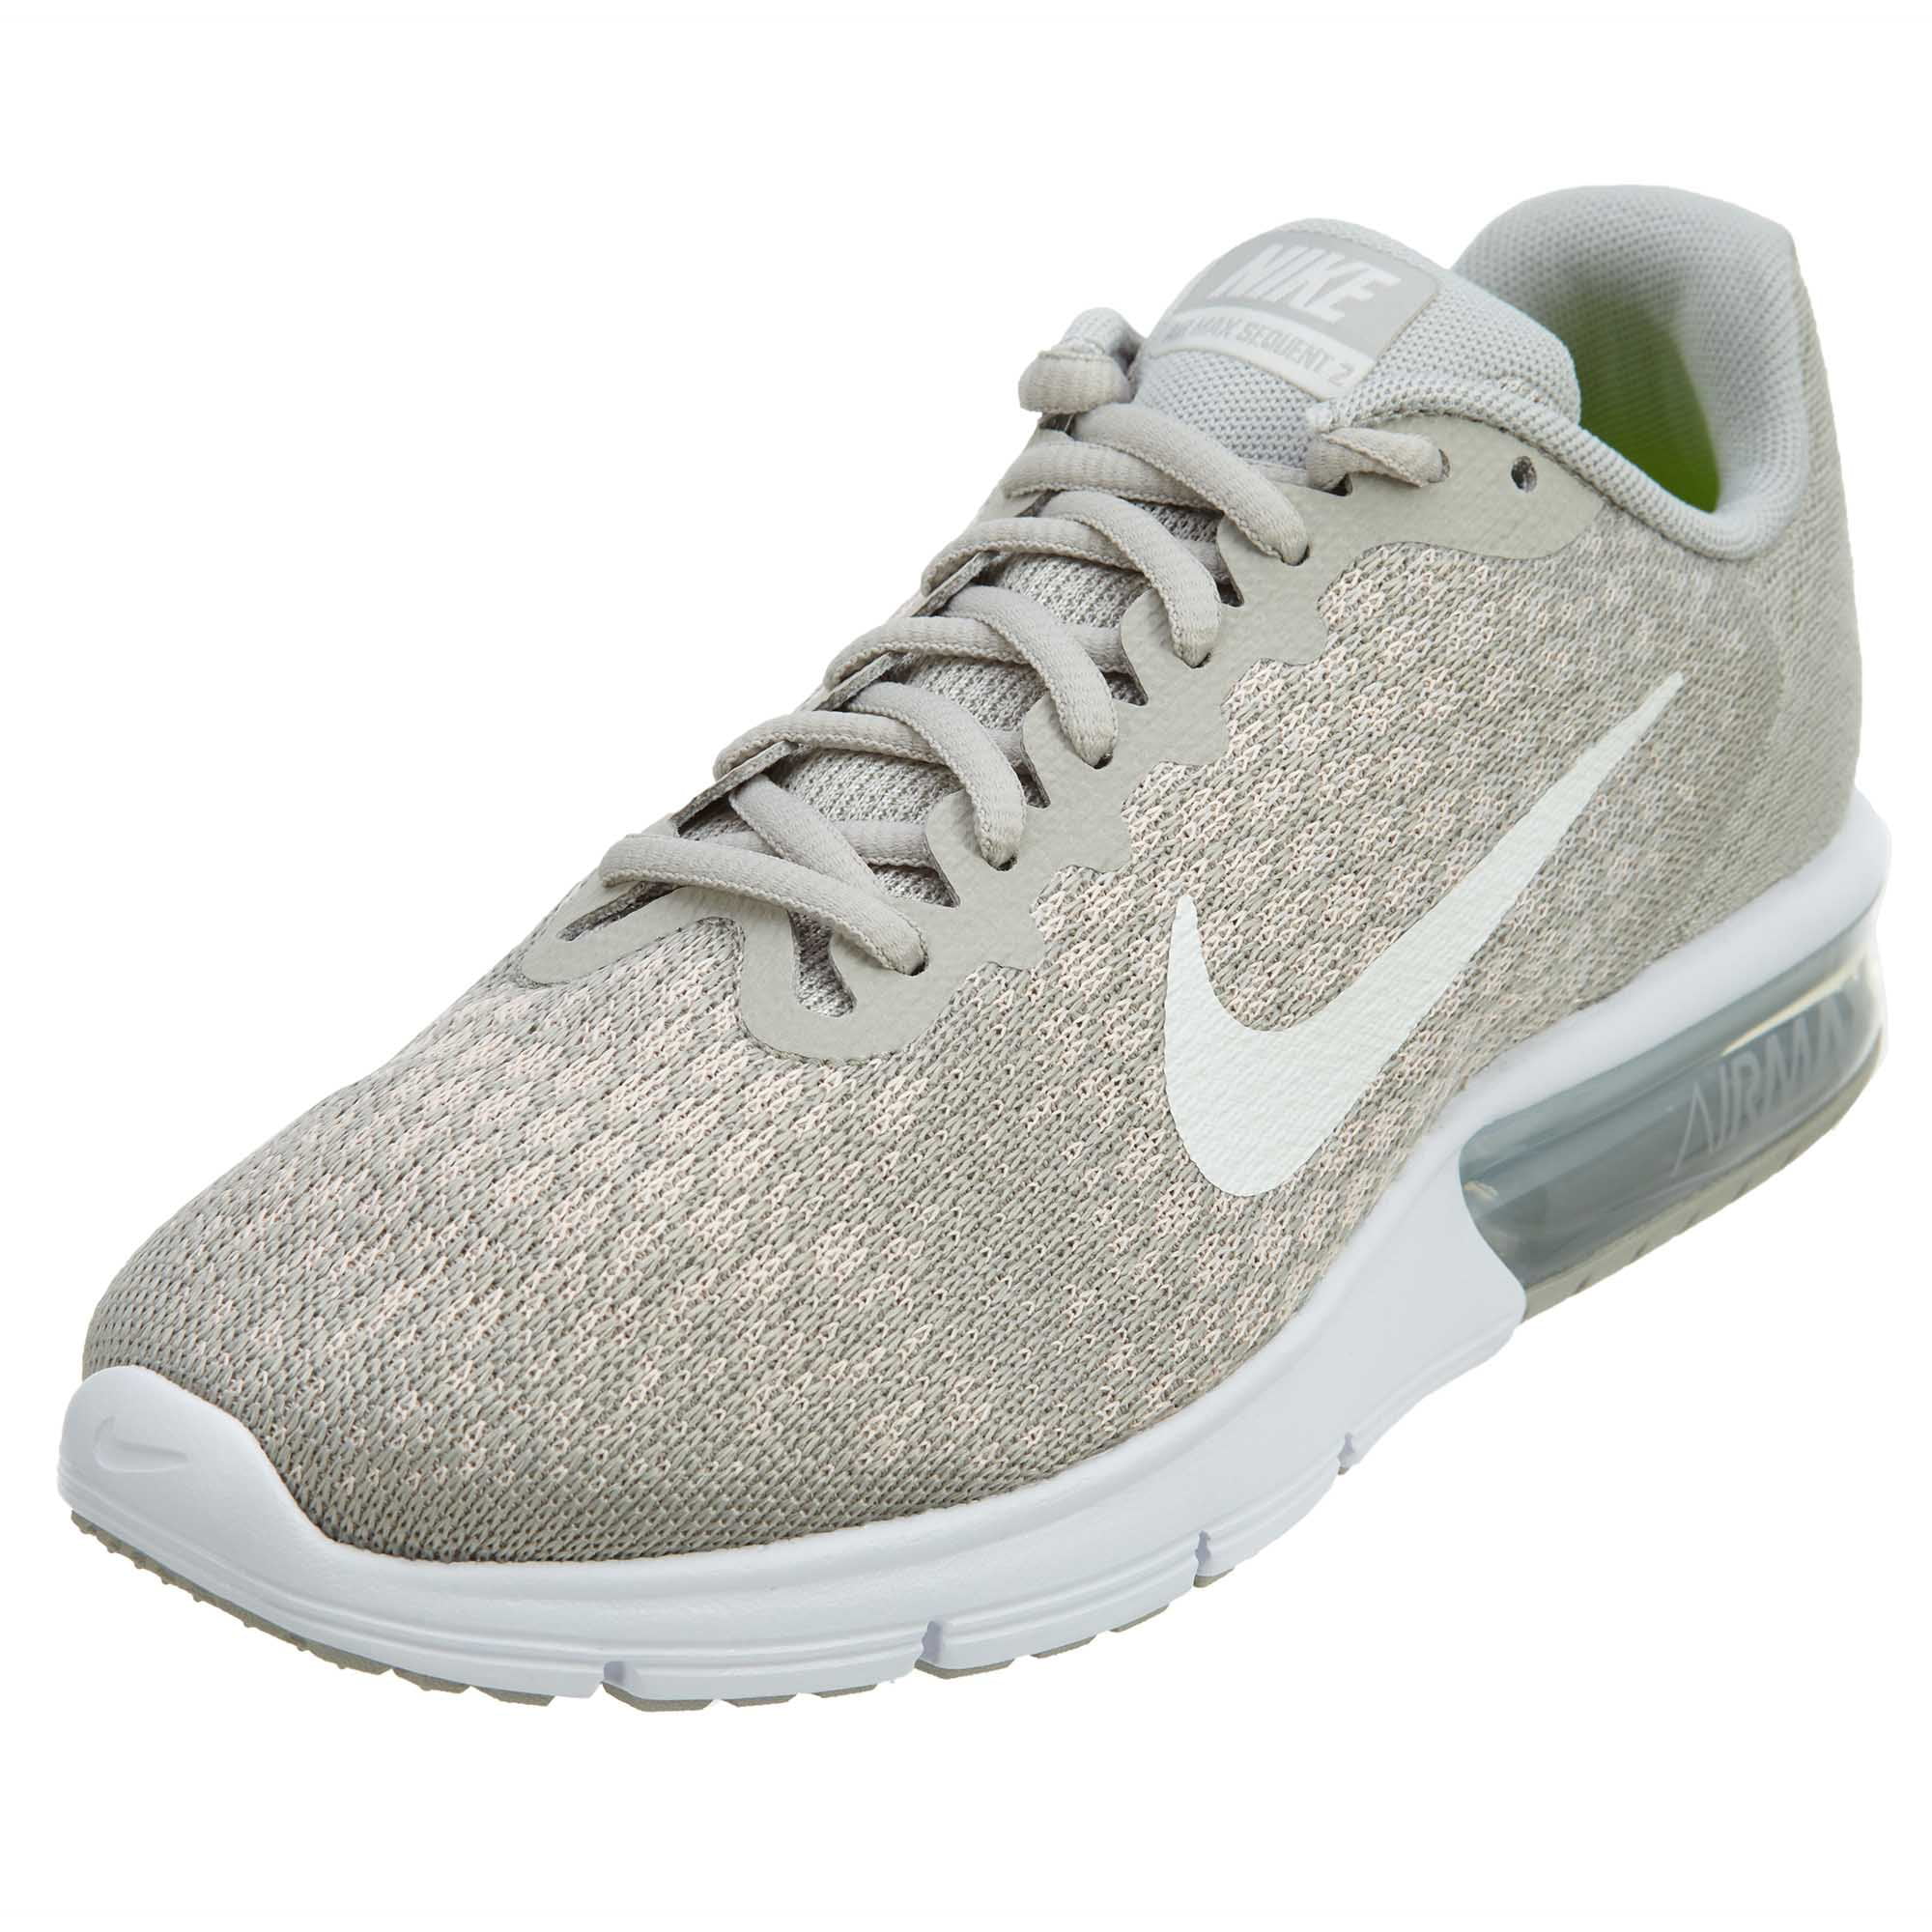 nike air max sequent 2 women's running shoe review